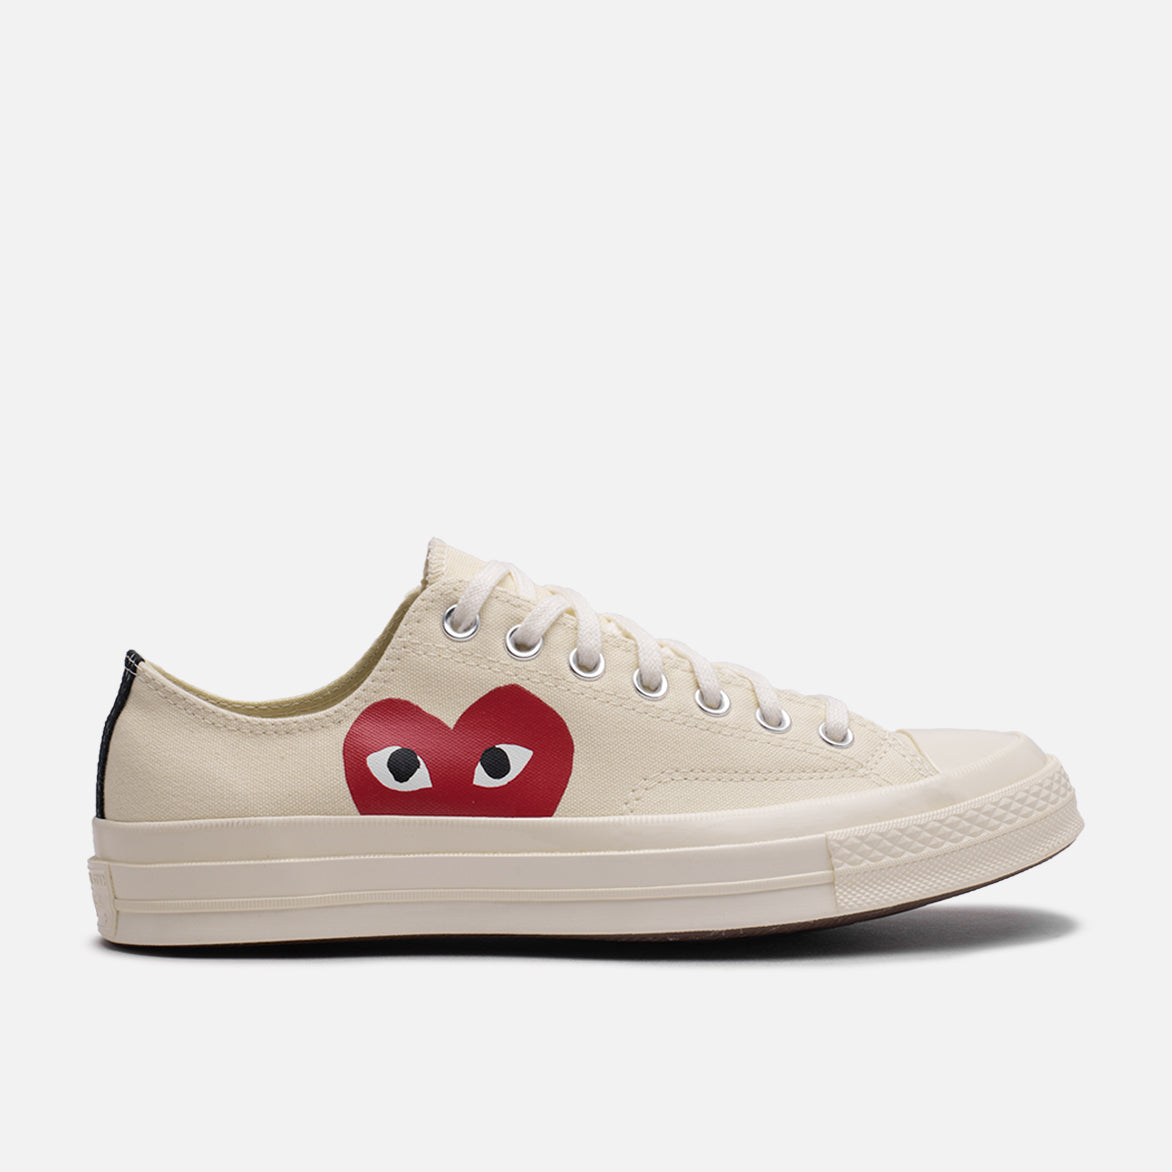 CDG PLAY X CONVERSE CHUCK TAYLOR ALL STAR '70 OX - WHITE |  lapstoneandhammer.com